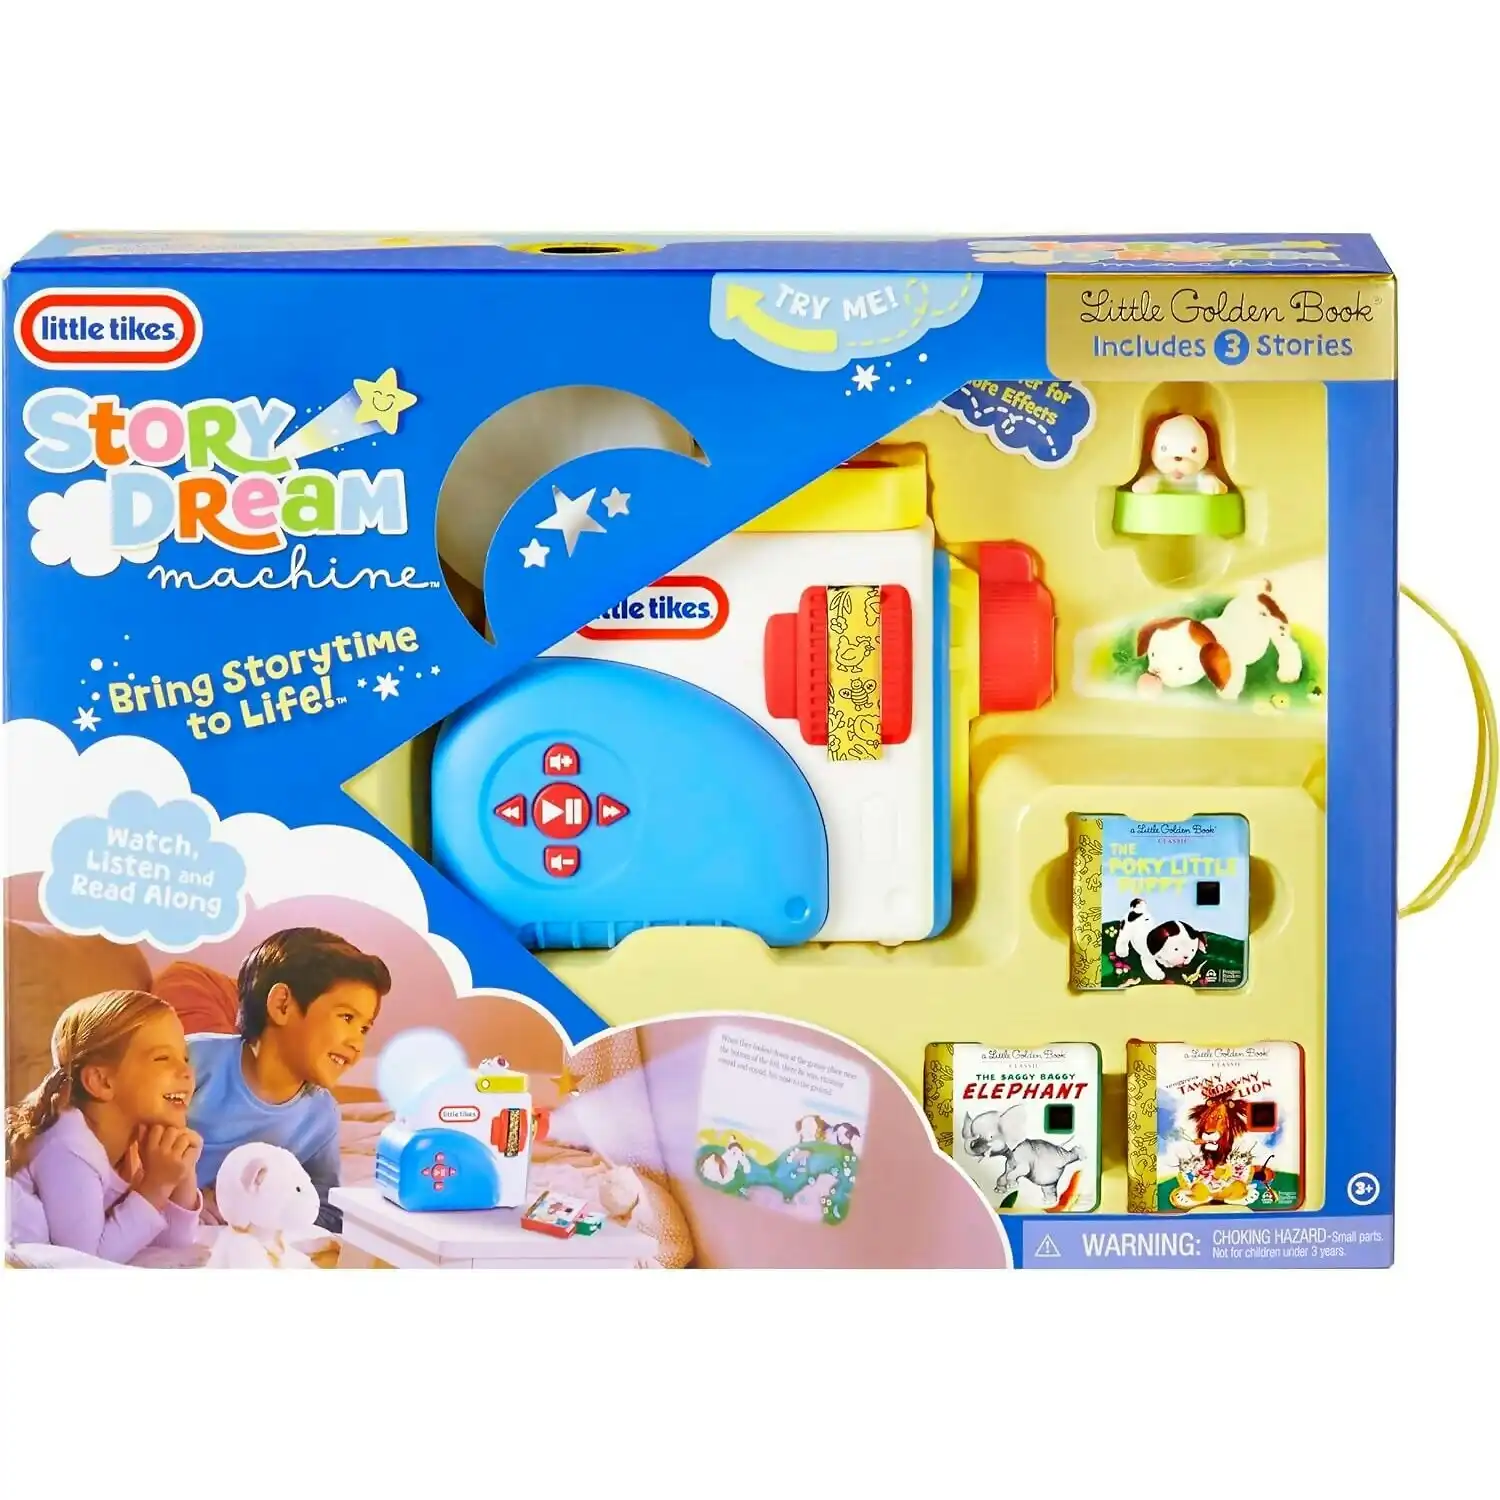 Little Tikes - Story Dream Machine With 3 Little Golden Book Stories - Light Sound And Audio Projector For Kids